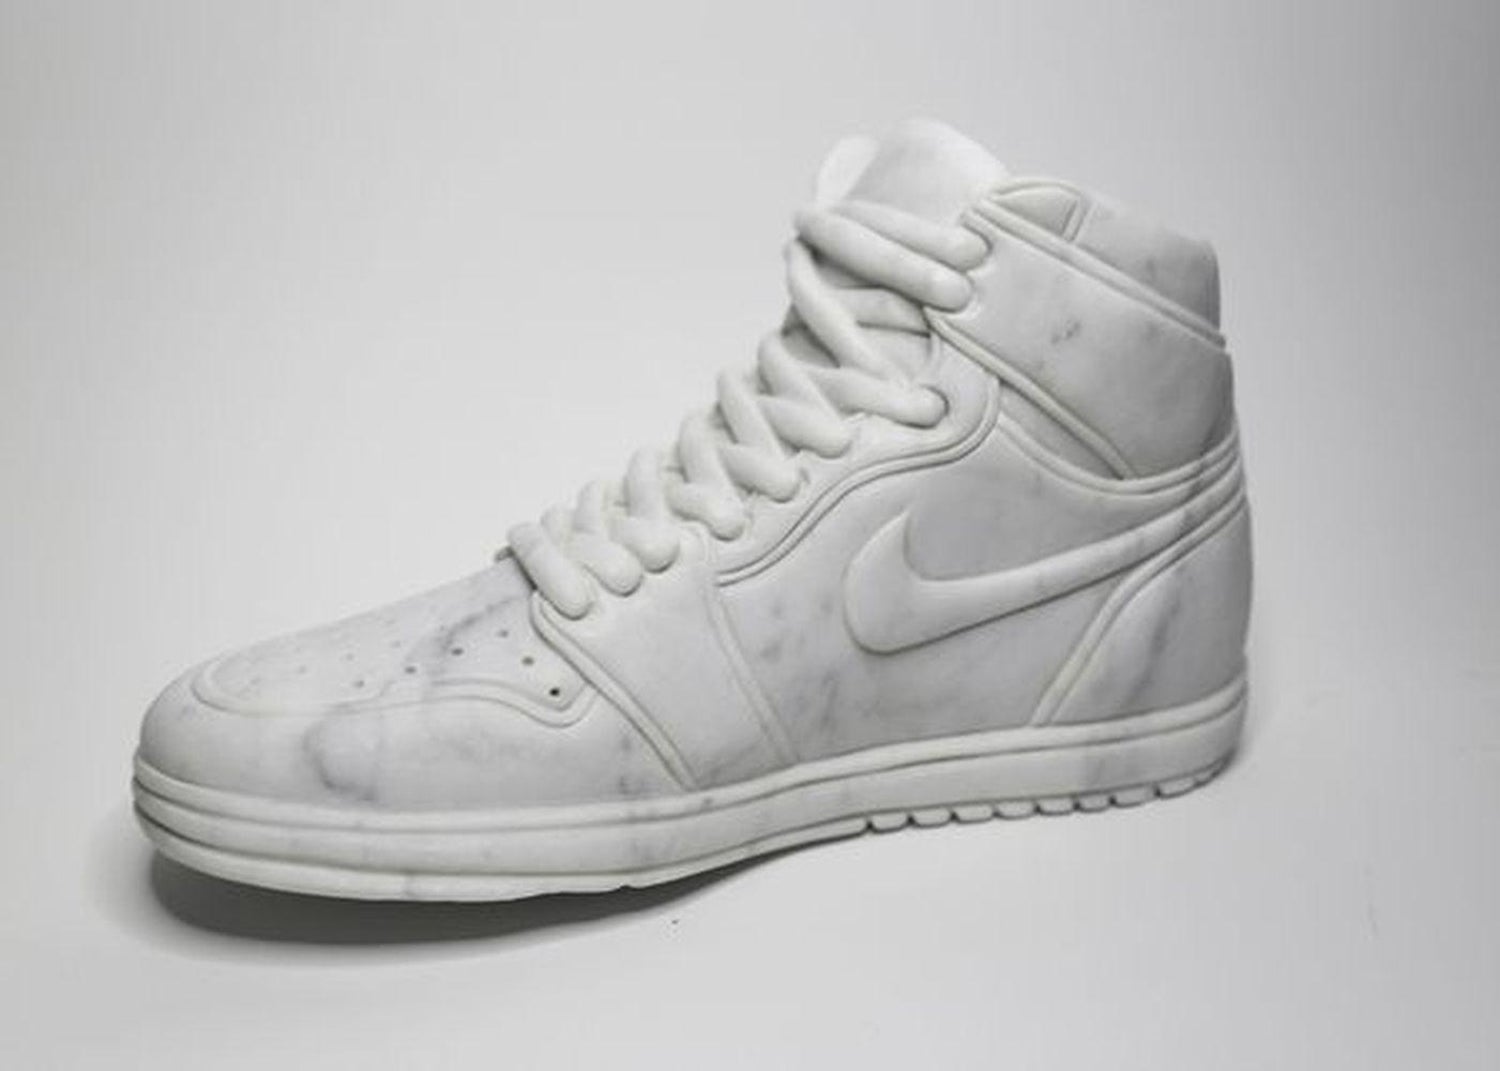 Frank Hollywood - White Marble Nike Shoes /Clothing and Fashion Sculpture /  